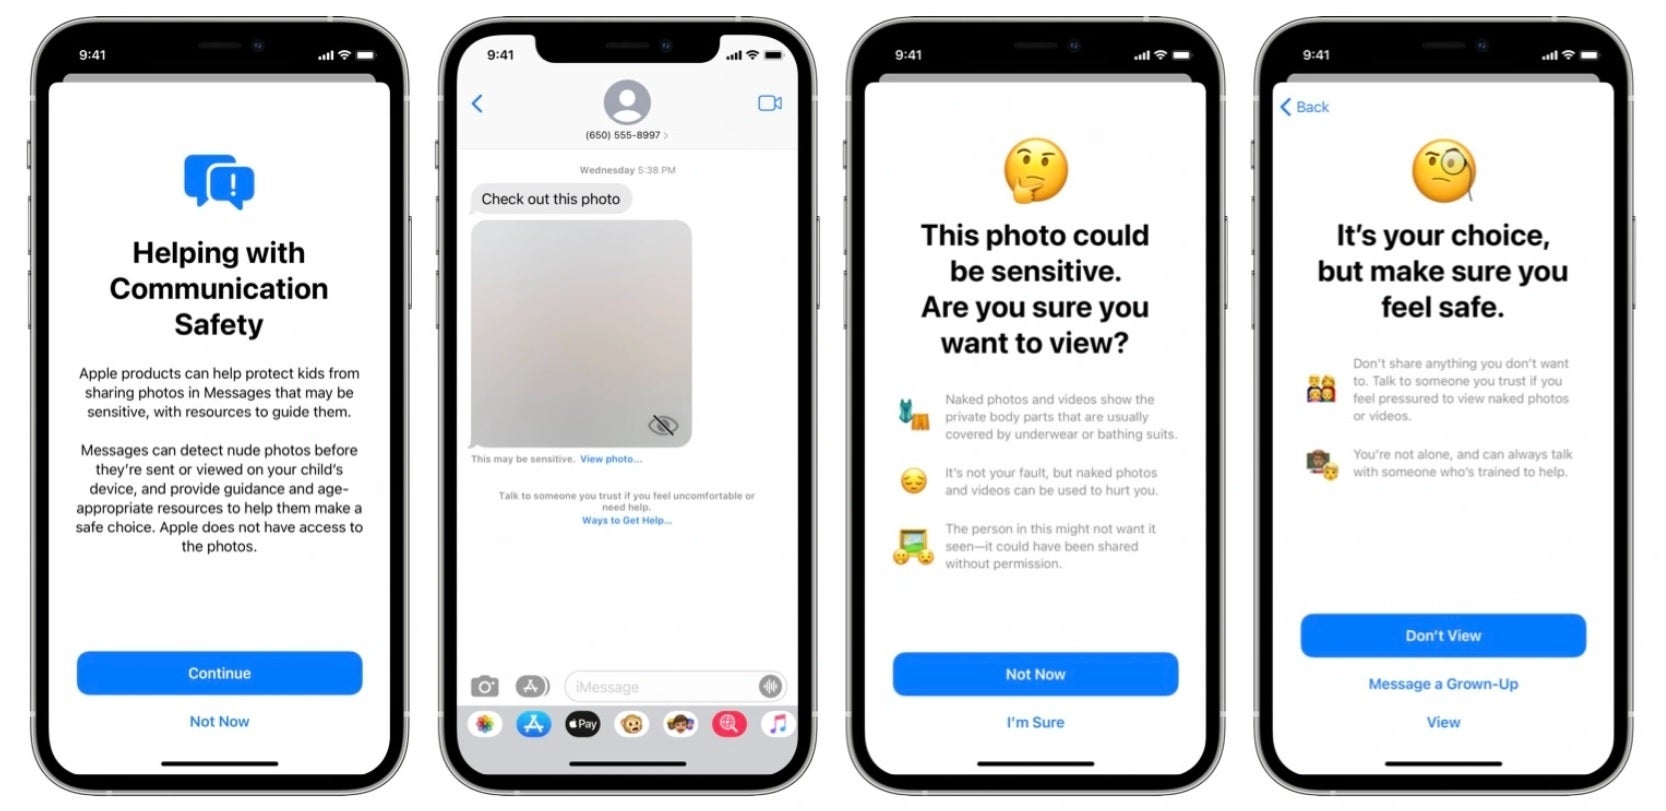 The update helps protect the kids from receiving Messages containing nudity - Apple drops iOS 15.2 beta 2 which adds protection for children from nudity, but not by default